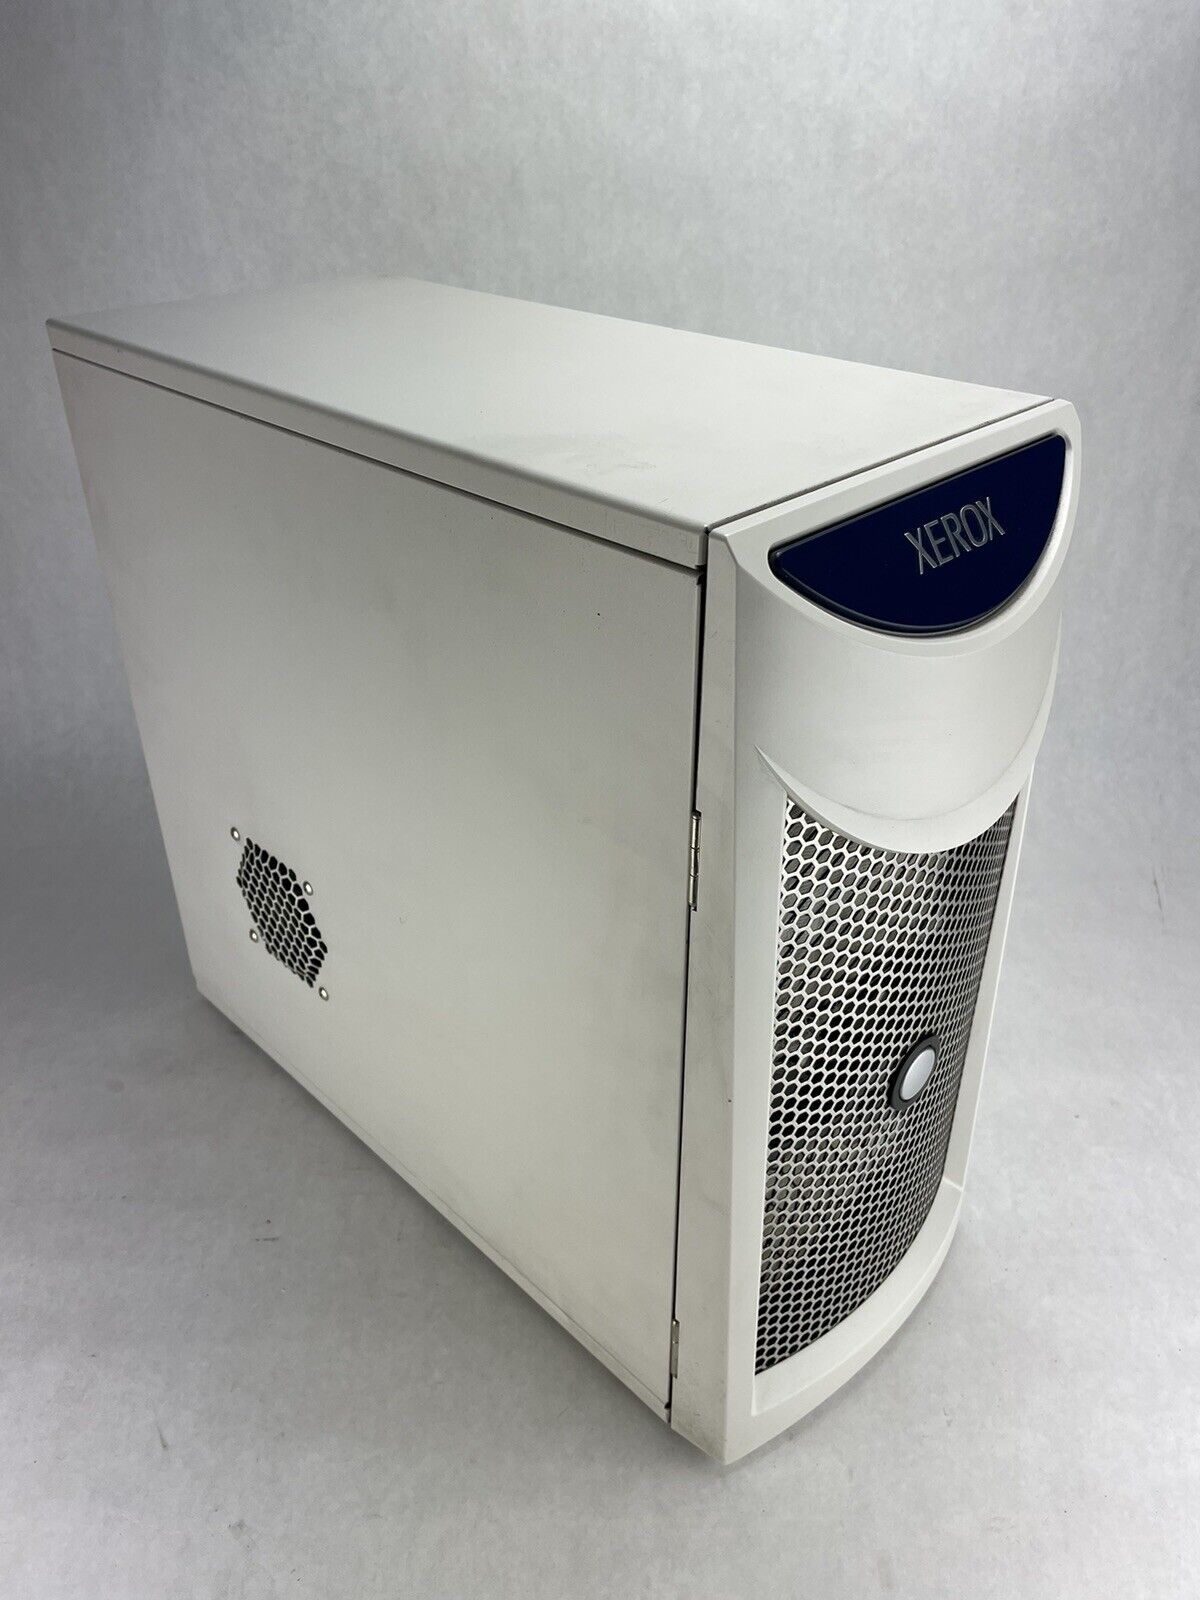 Xerox Mid Tower Computer Case w/Emacs HP2-640P 460w Power Supply